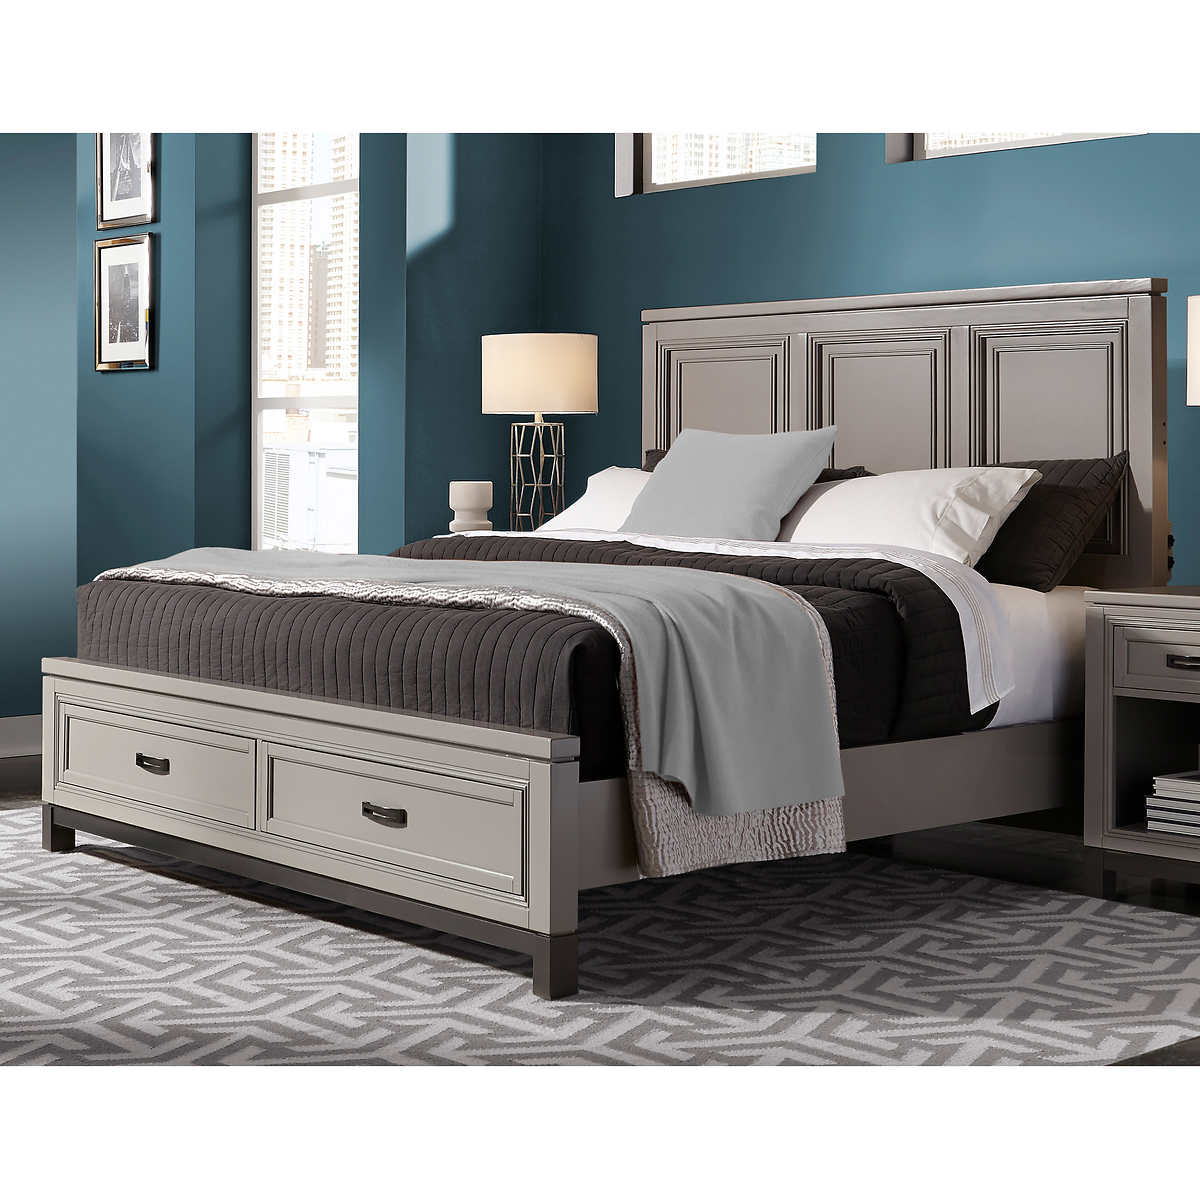 Norah Cal King Storage Bed Costco, Cal King Bed Frame Measurements